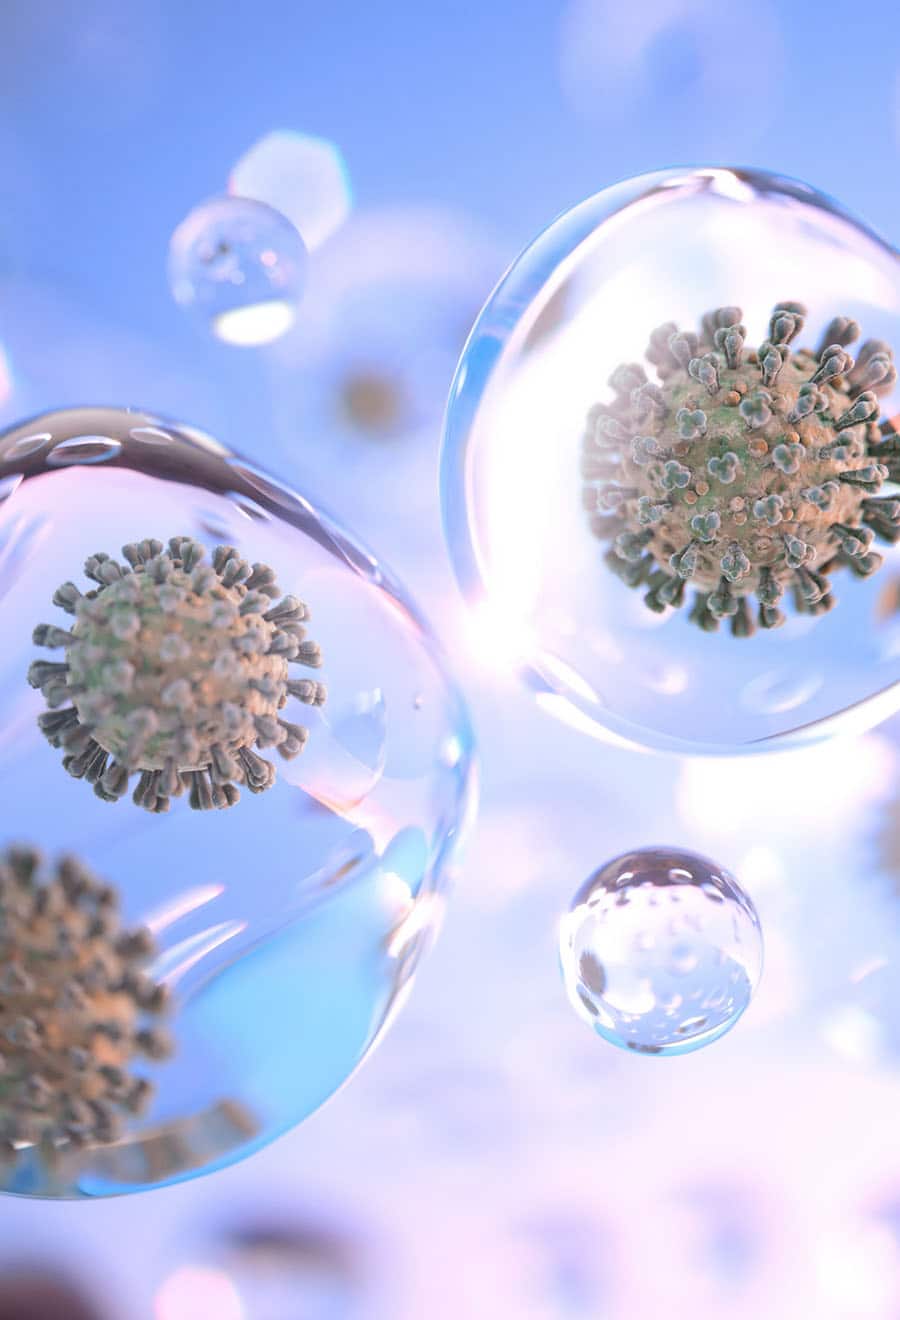 Super-high magnification of coronavirus particles (like the current SARS-CoV-2 pandemic) spread through tiny droplets of liquid (aerosols) floating through the air. Illustration for means of transmission: droplet and aerosolized infection.